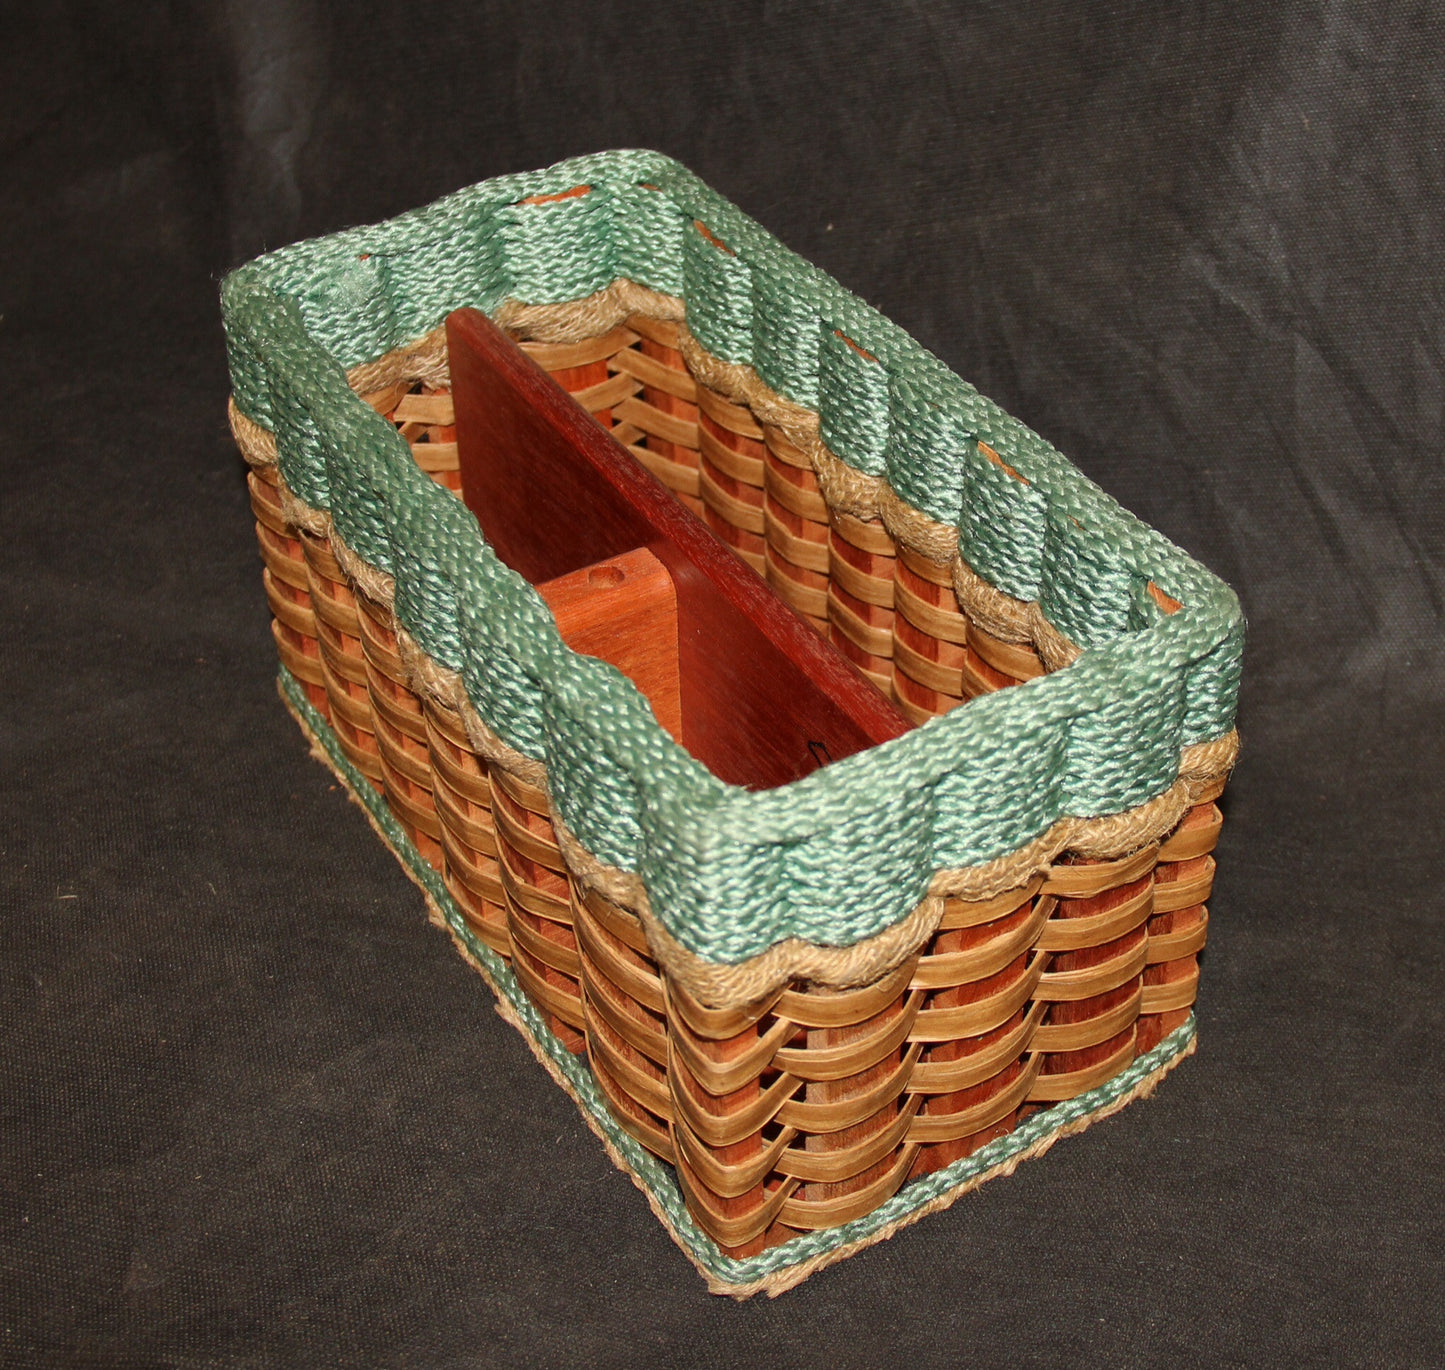 Mail Organizer Basket-Shabby Chic Collection